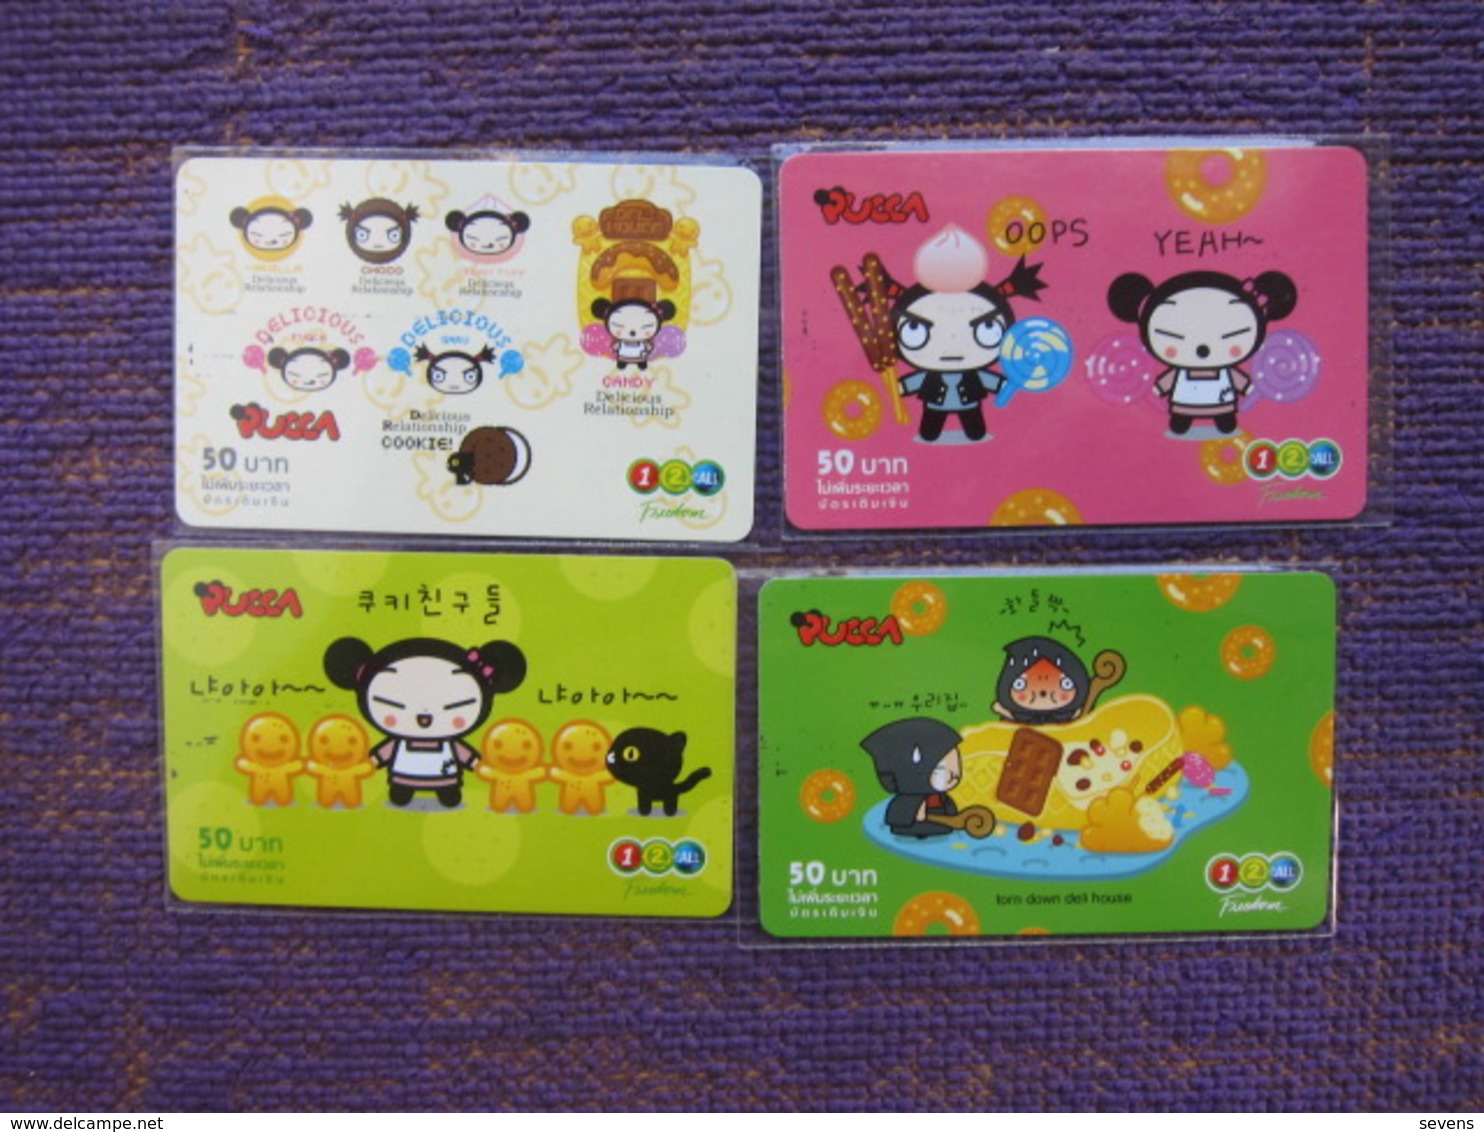 Prepaid Phonecard, Pucca, Set Of 11,used - Thailand